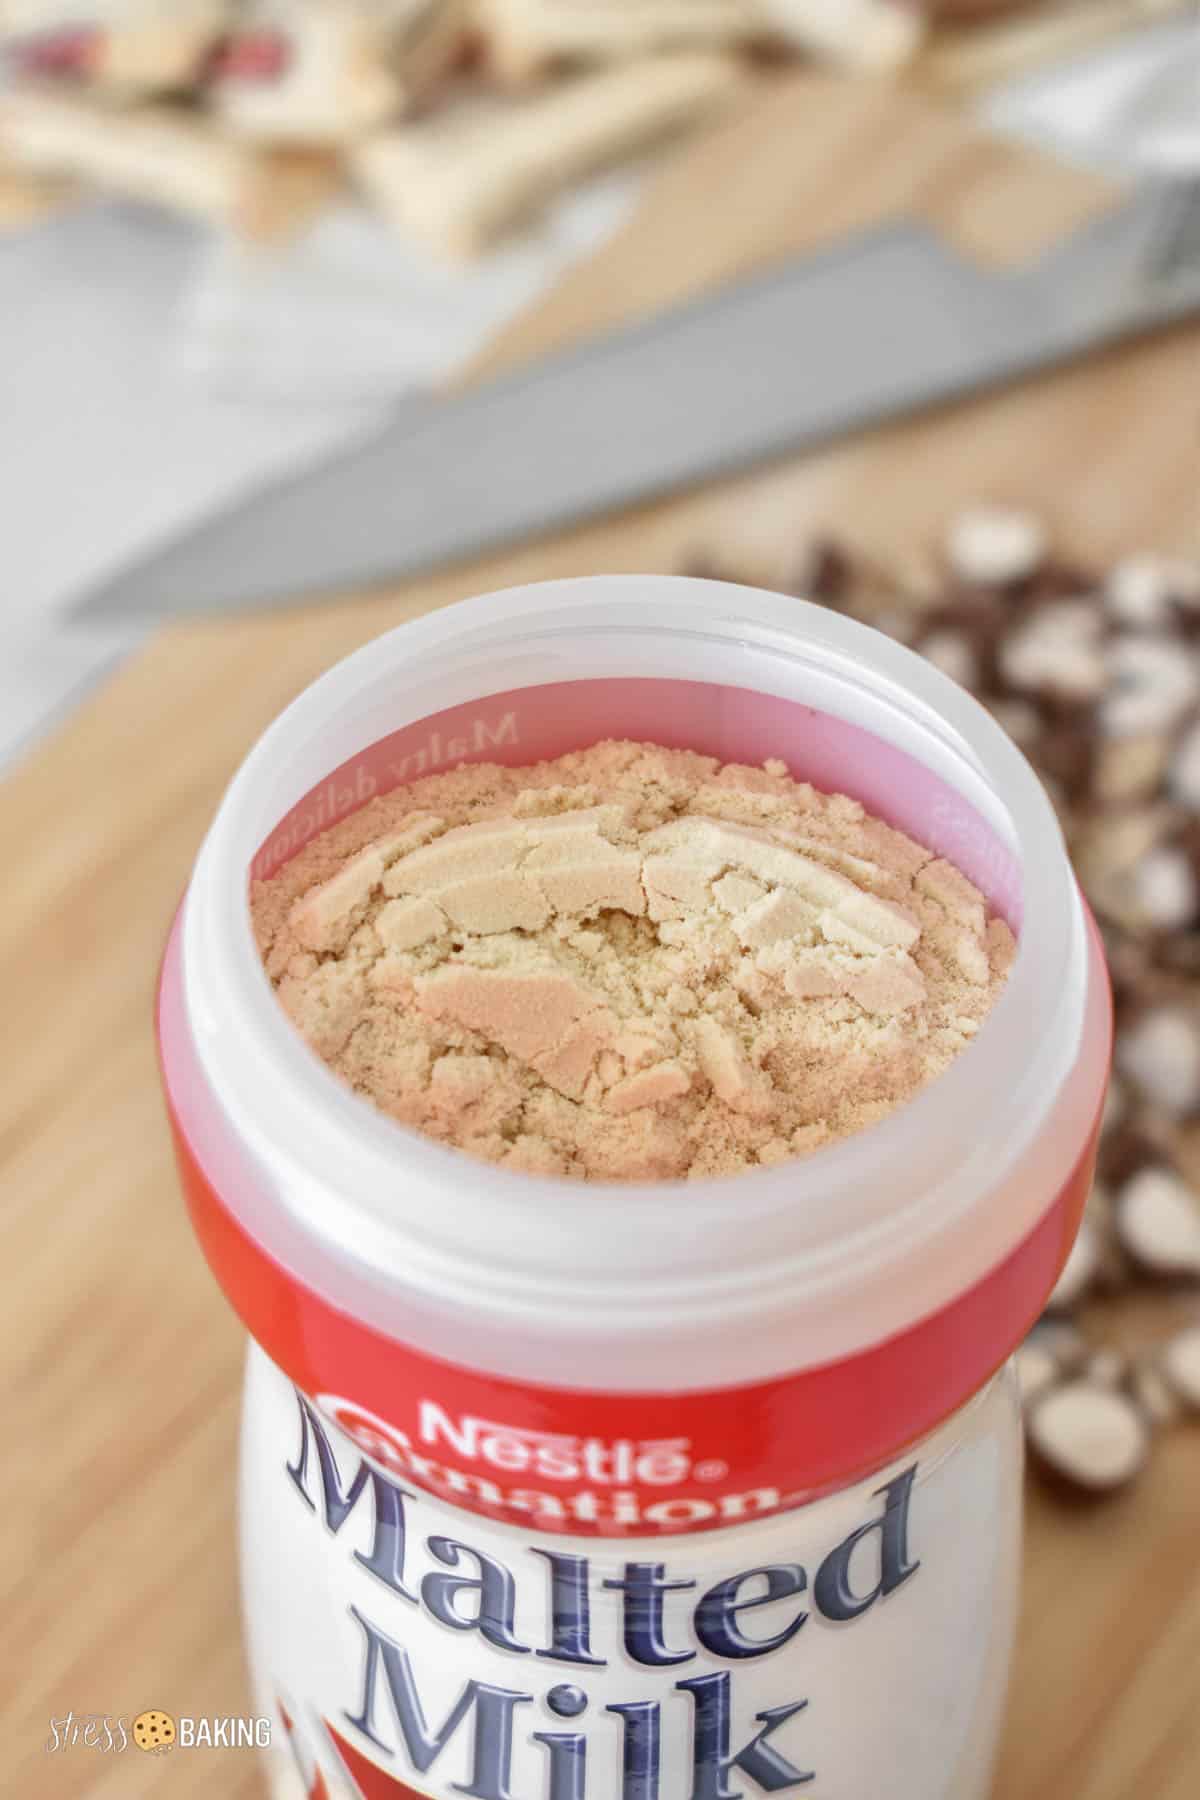 Close up of container of Nestle Carnation Malted Milk powder